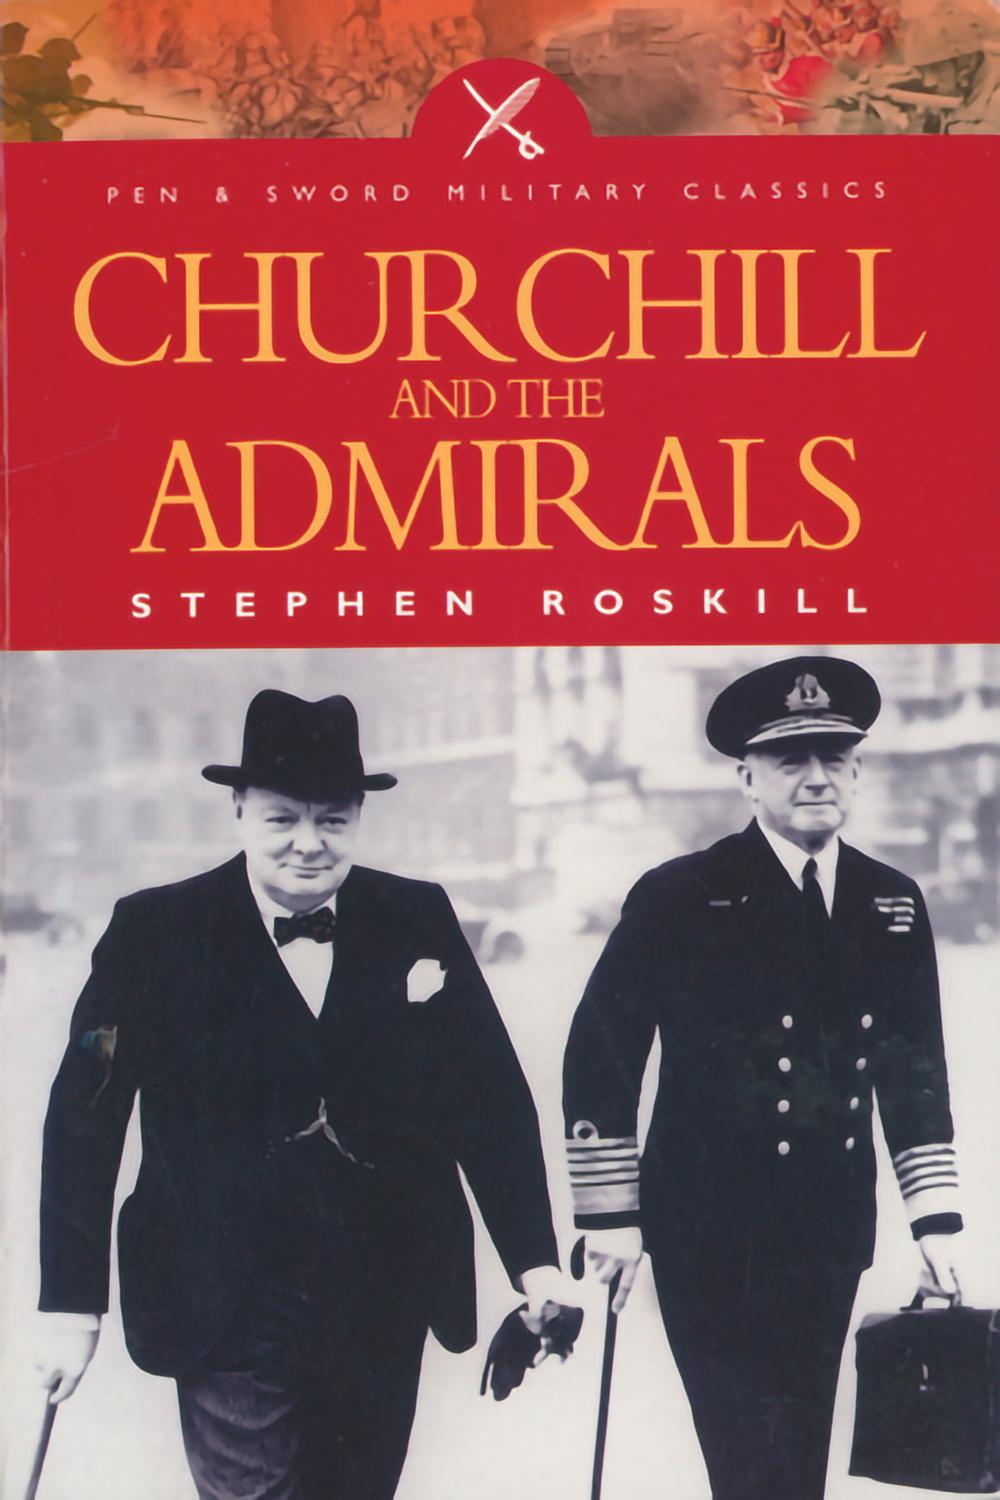 Churchill and the Admirals - Stephen Roskill